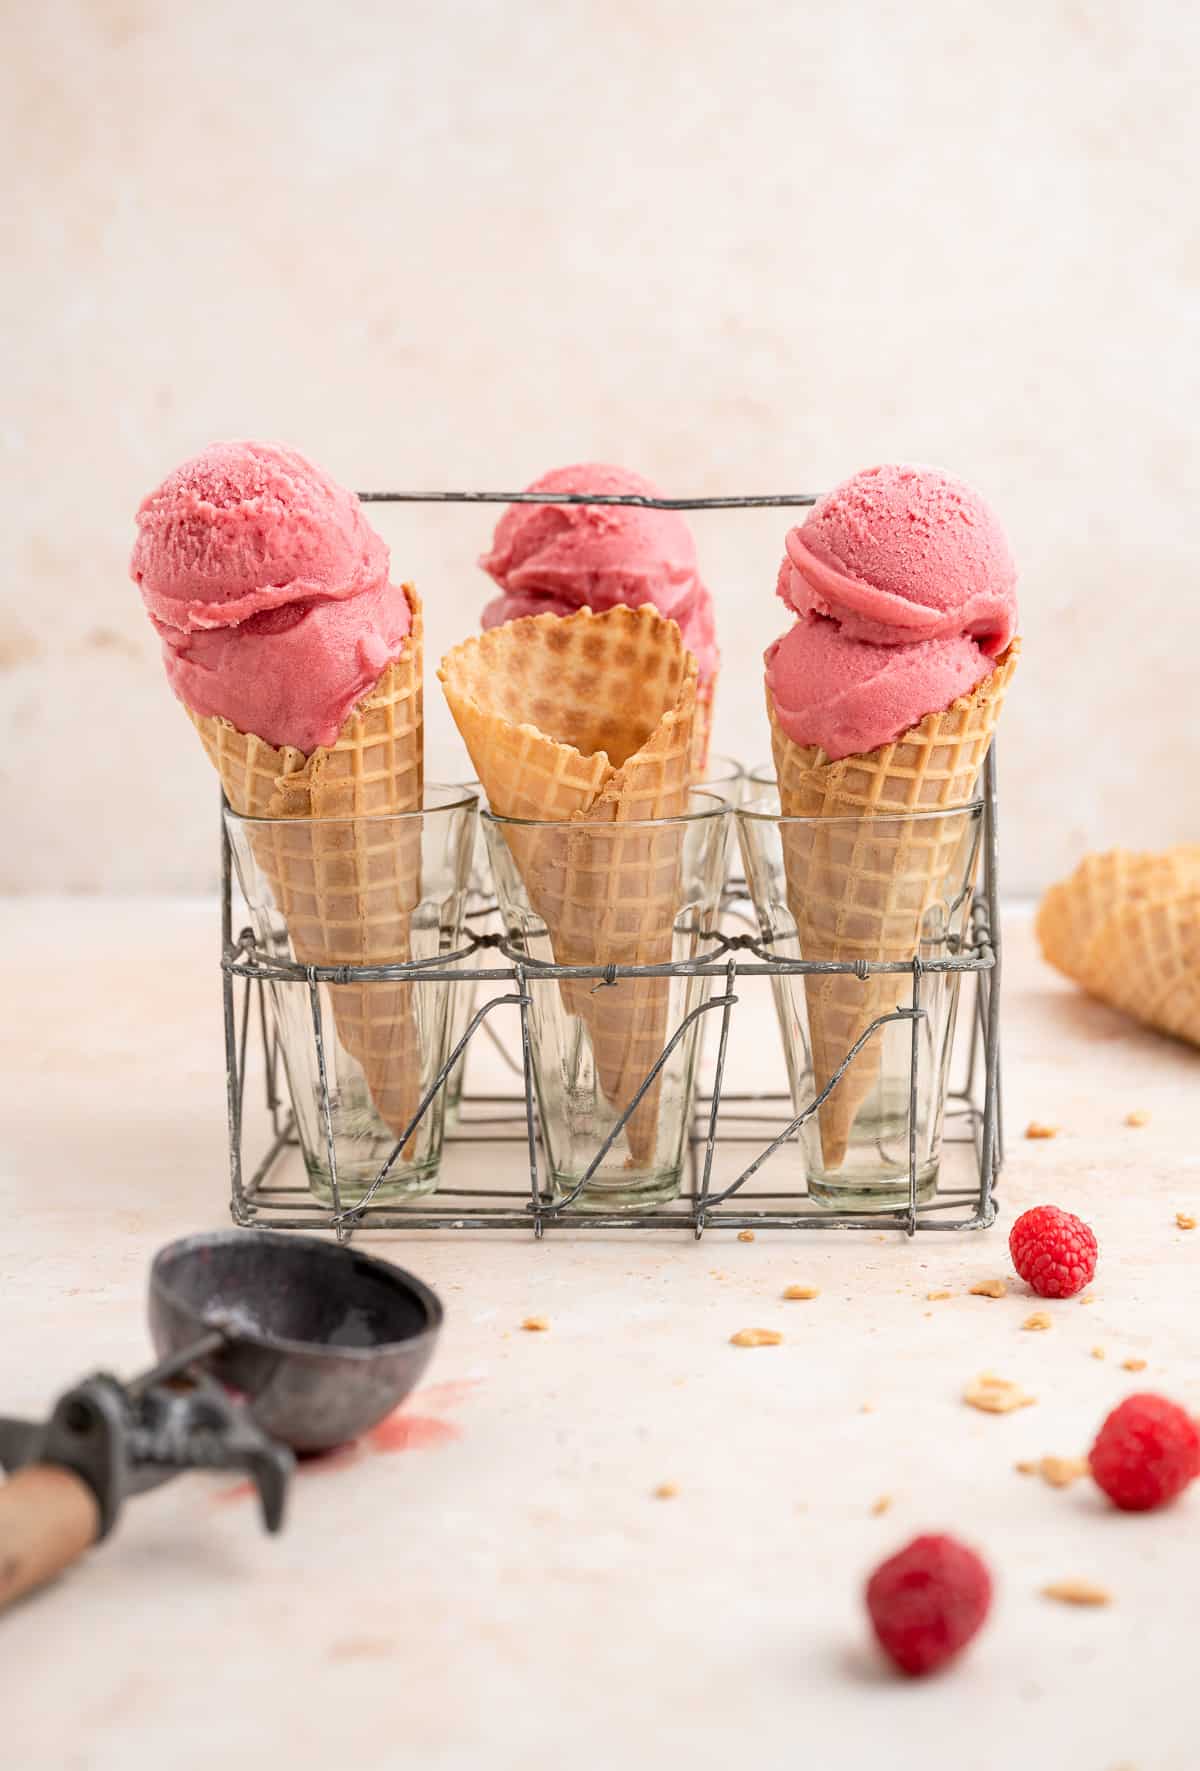 3 icecream cones topped with 2 scoops of raspberry sorbet each